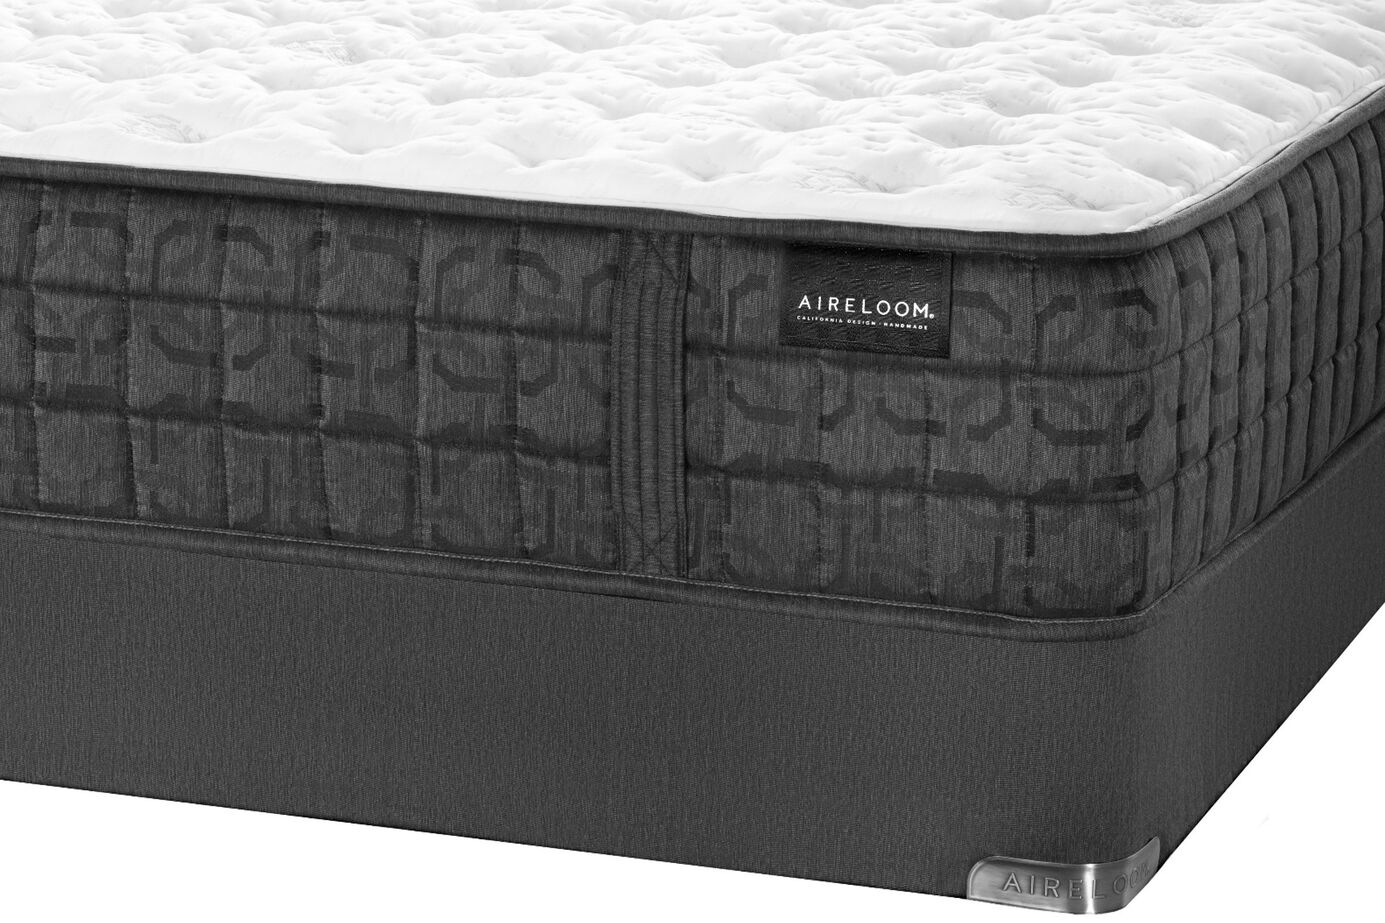 Aireloom Pacific Bay Orion Plush Mattress 12.5" image number 3